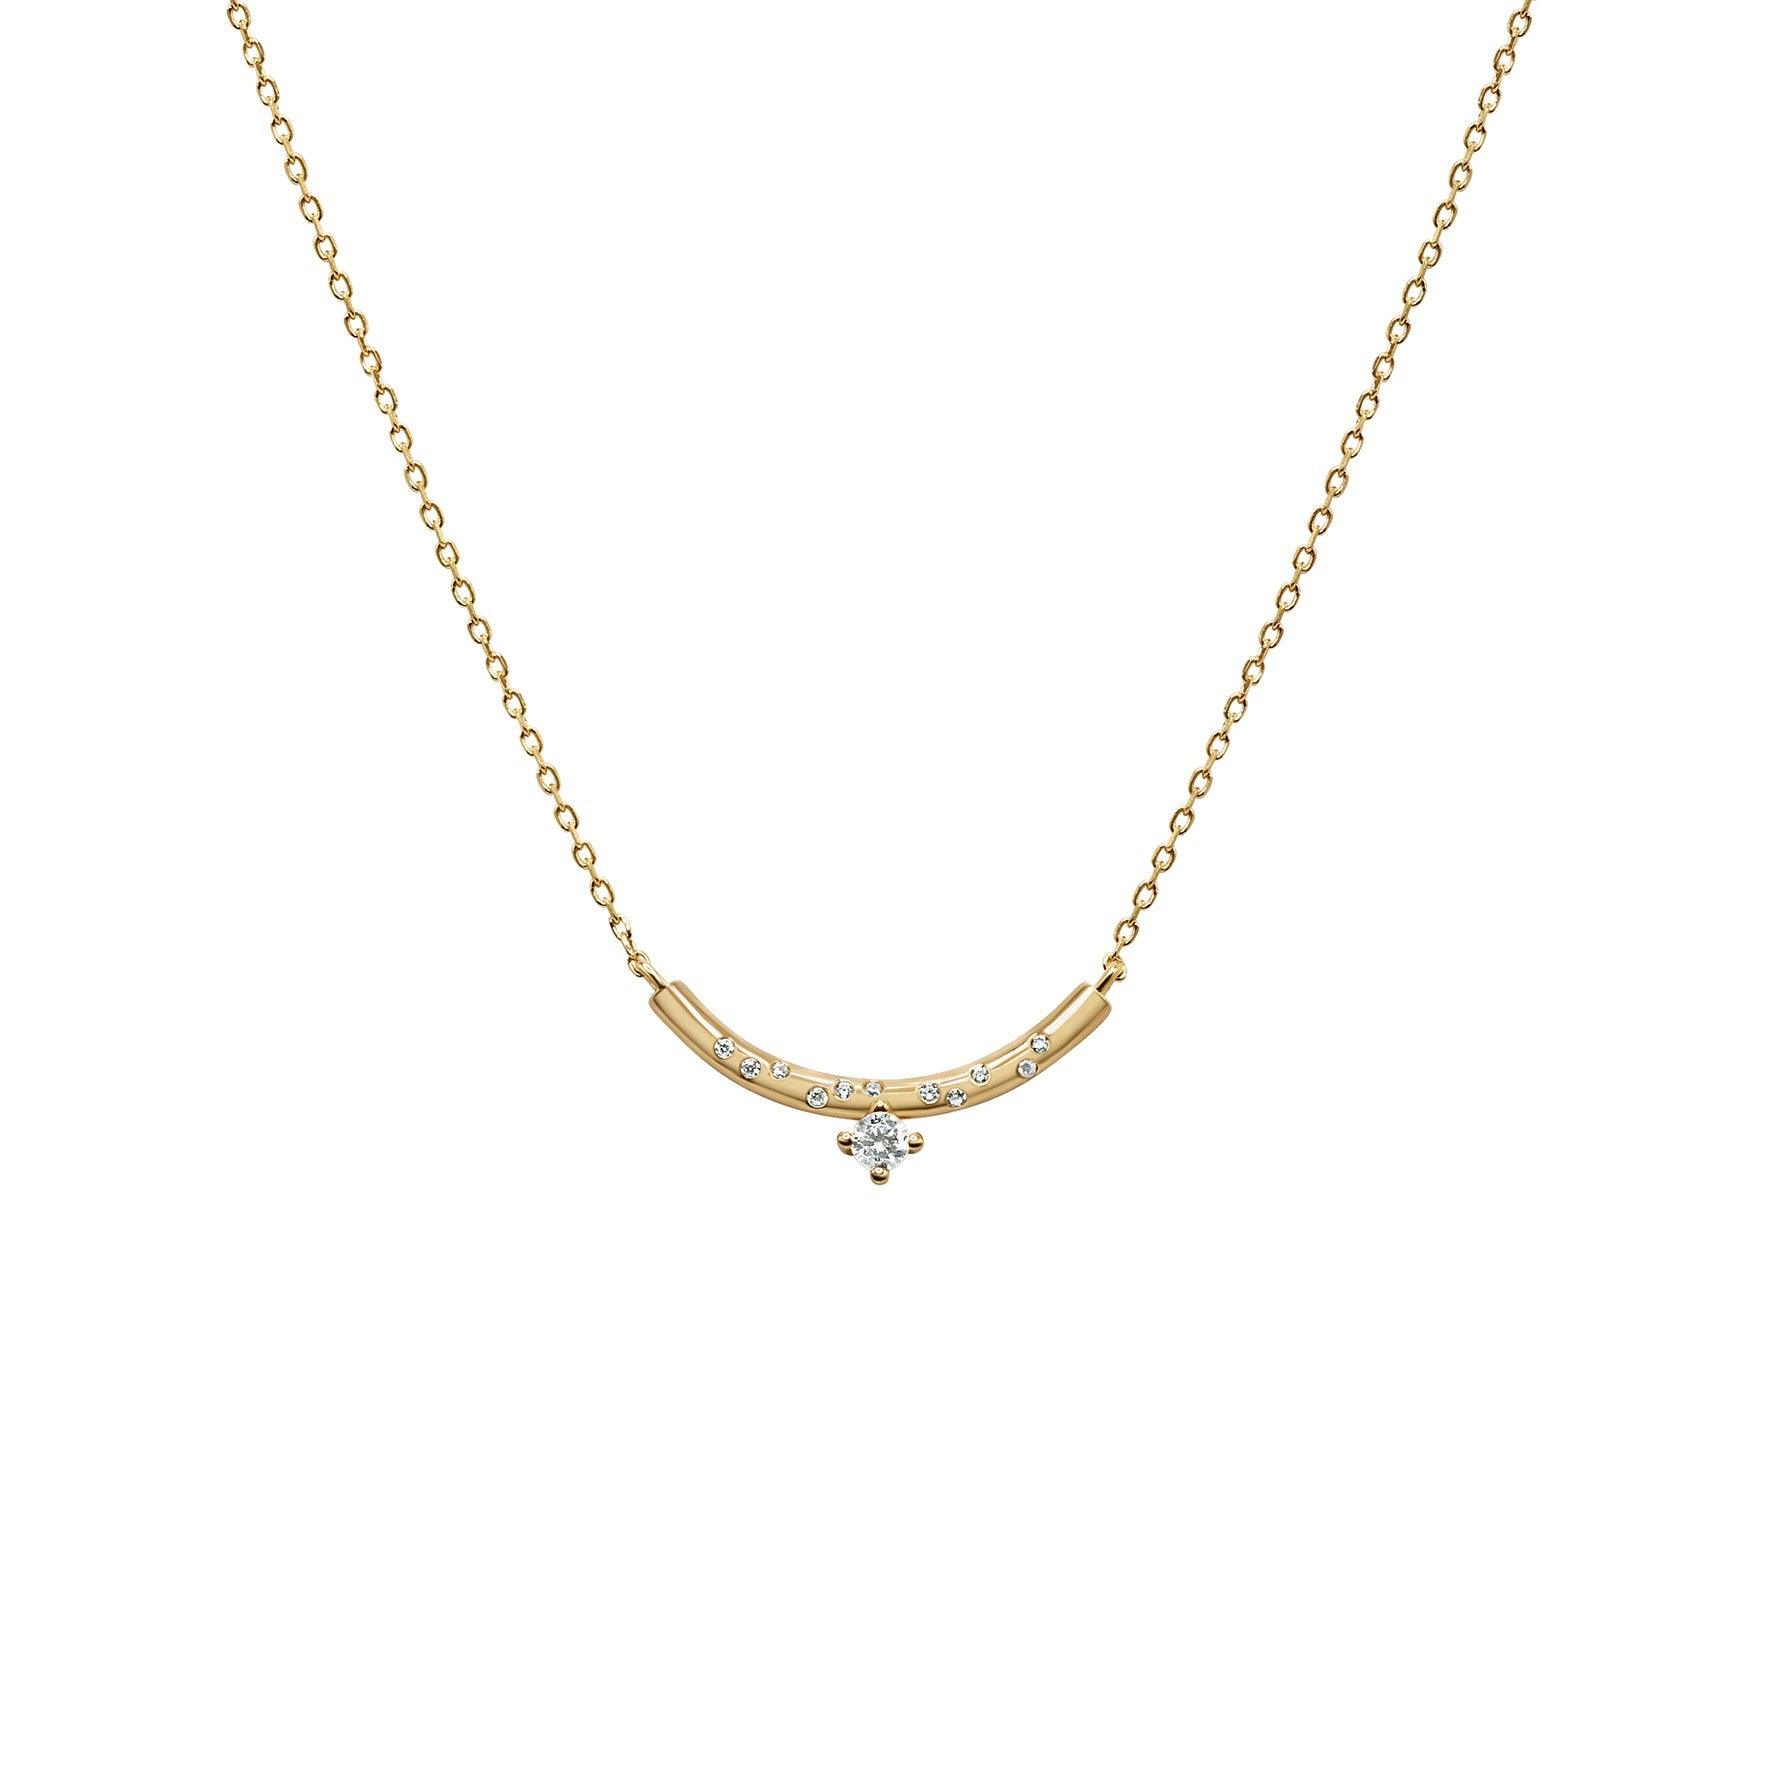 Lux Brumalis Necklace - Ptera Jewelry